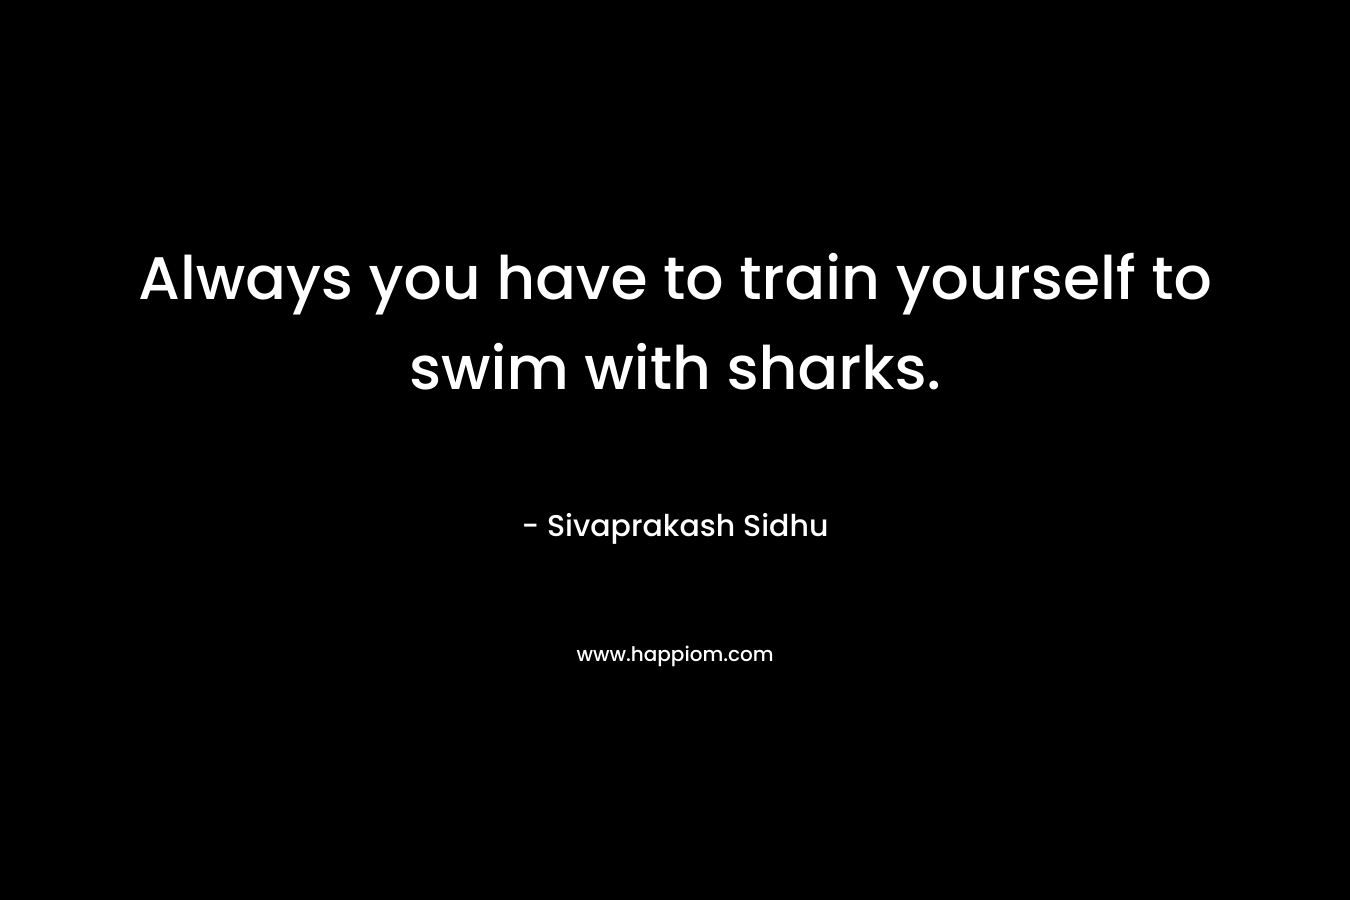 Always you have to train yourself to swim with sharks.